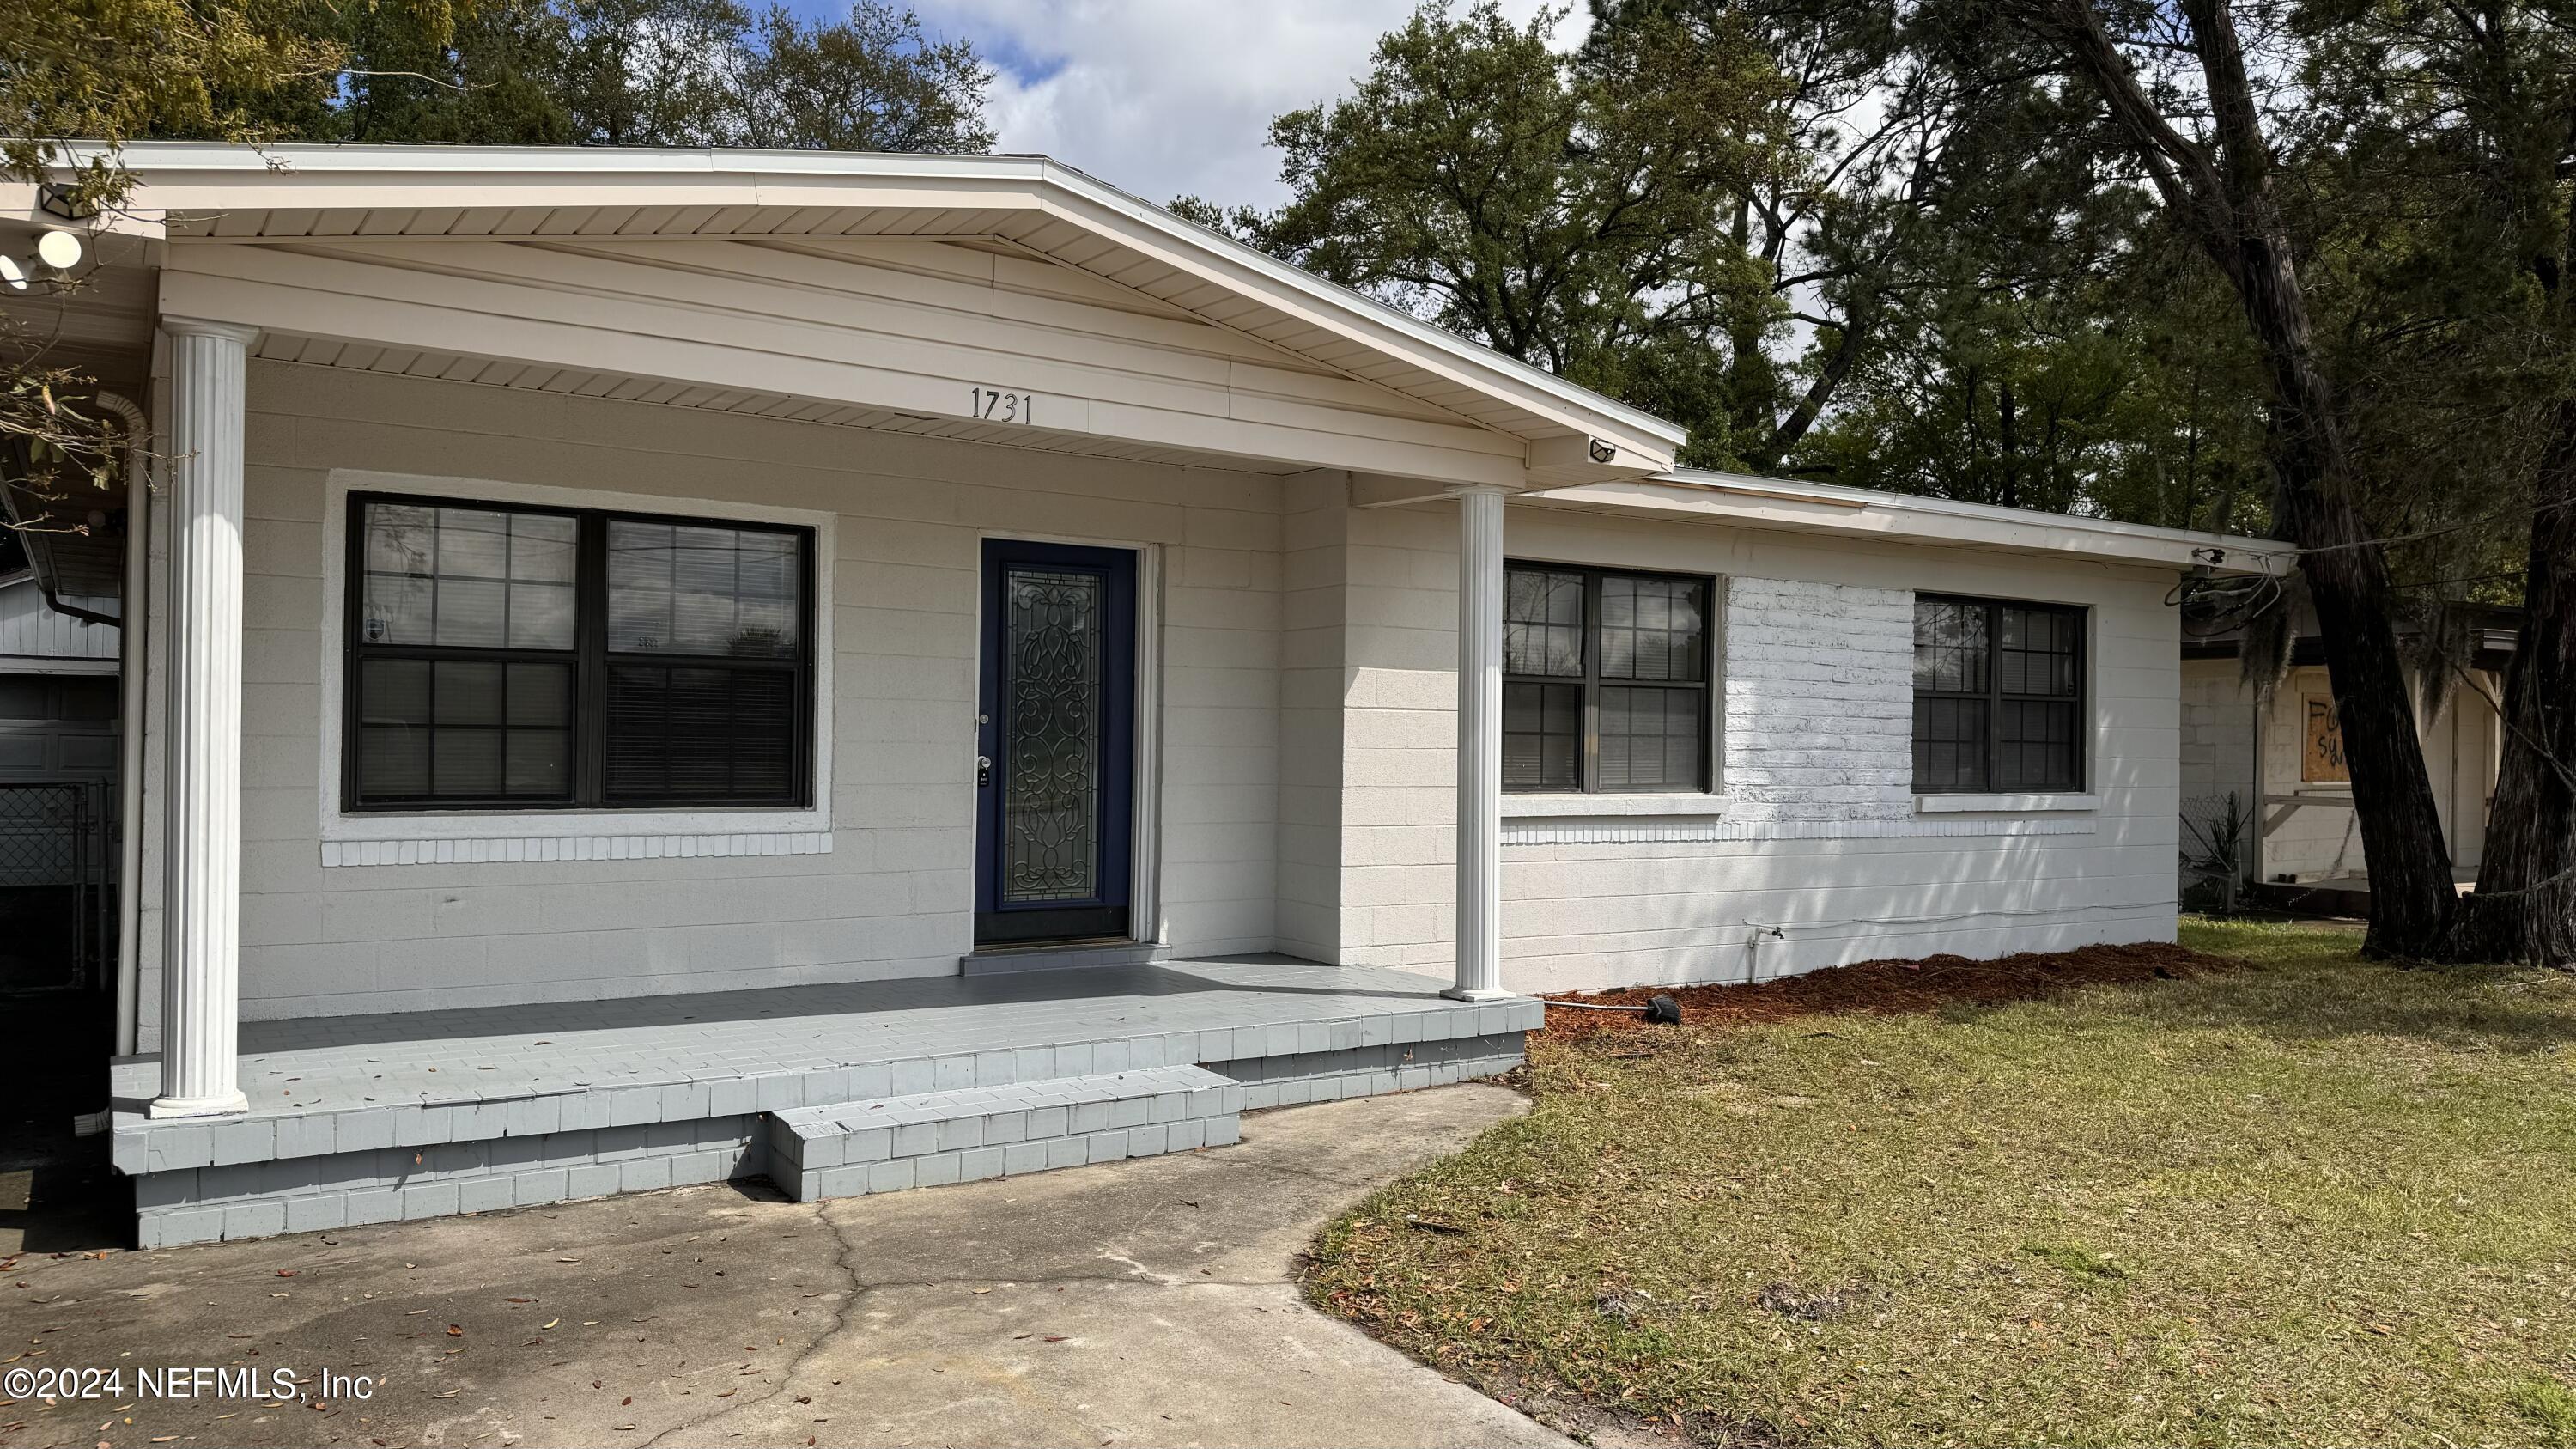 Jacksonville, FL home for sale located at 1731 MELSON Avenue, Jacksonville, FL 32254